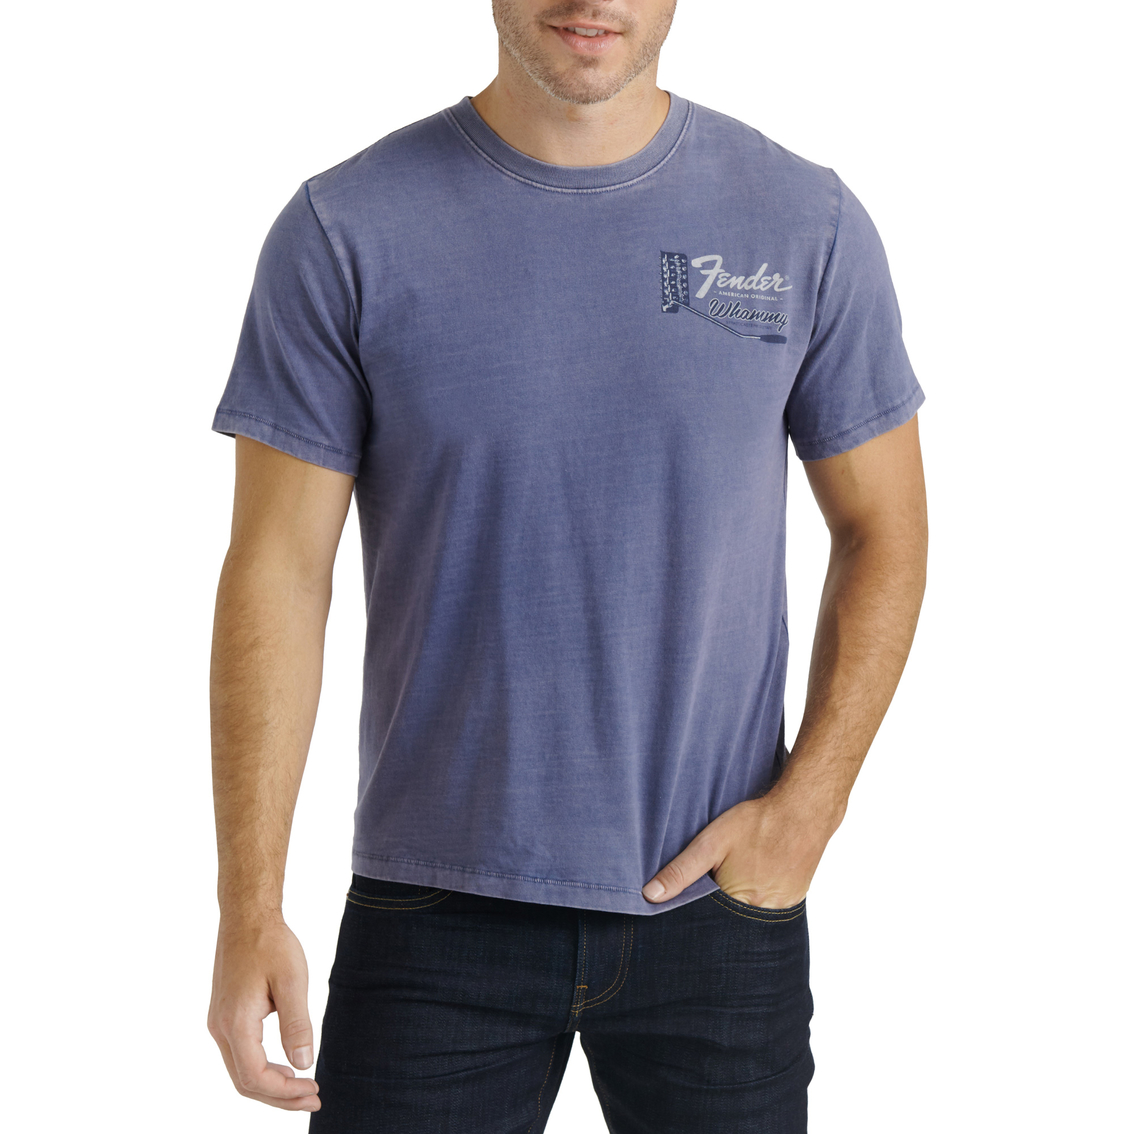 Lucky Brand Fender Whammy Tee | Shirts | Clothing & Accessories | Shop ...